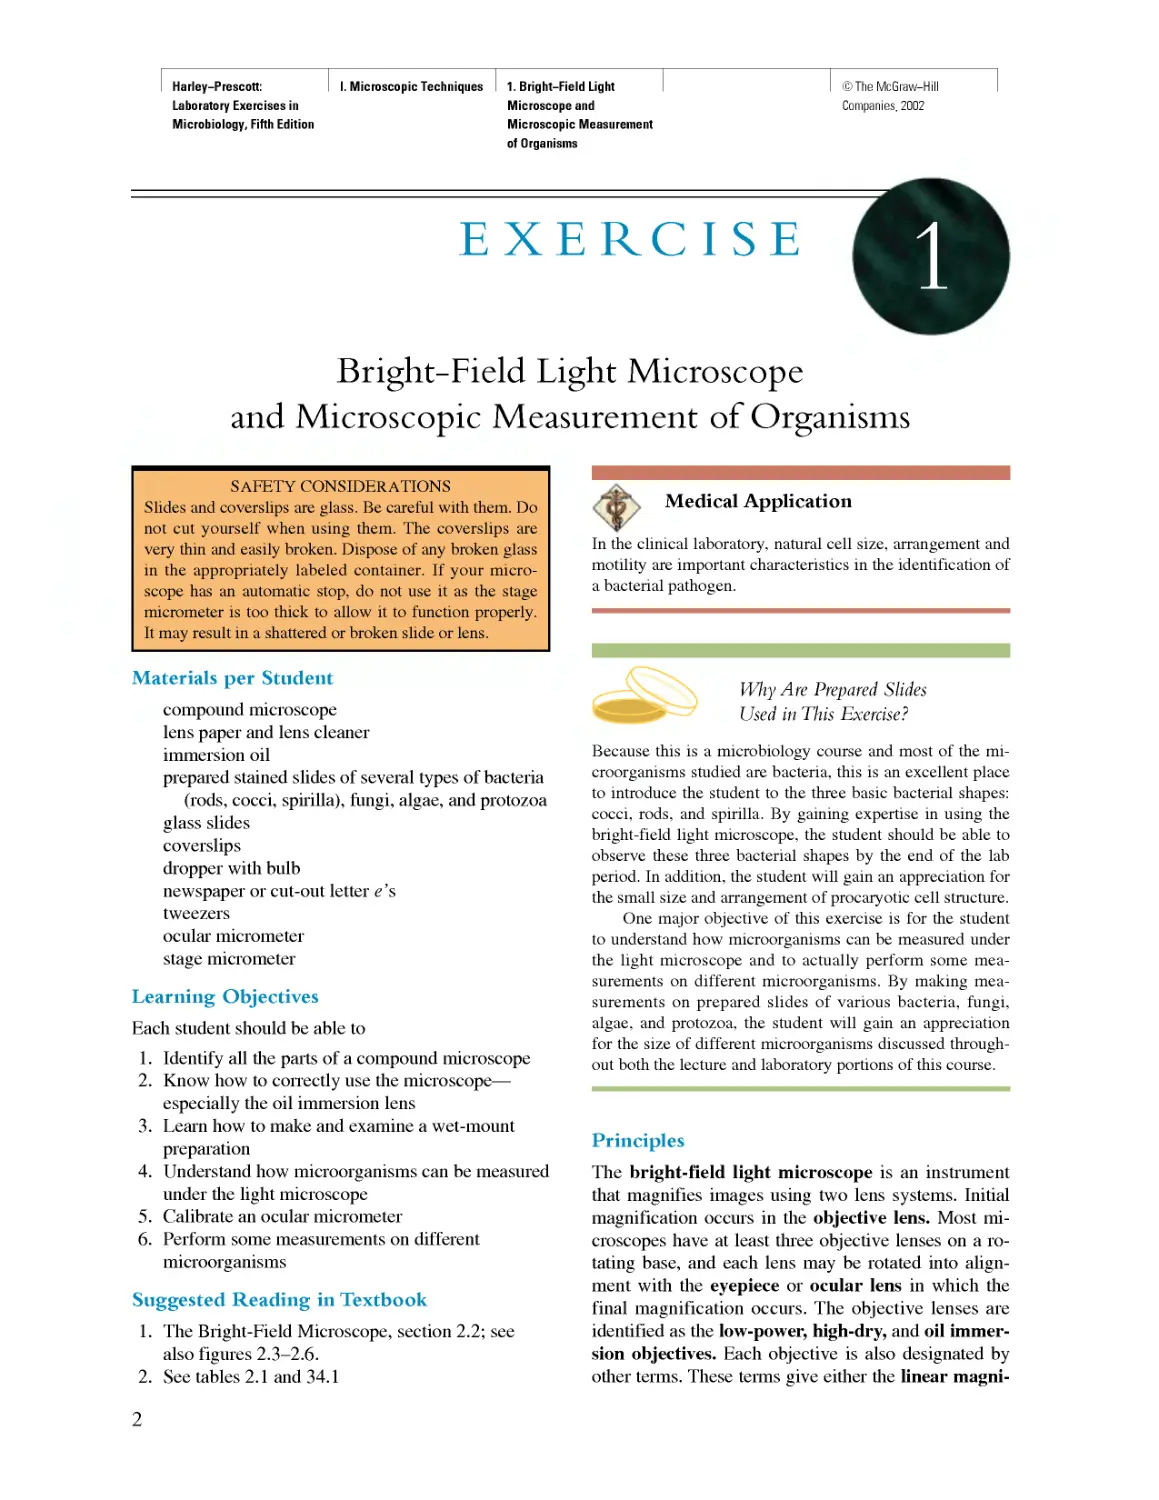 1. Bright-Field Light Microscope and Microscopic Measurement of Organisms